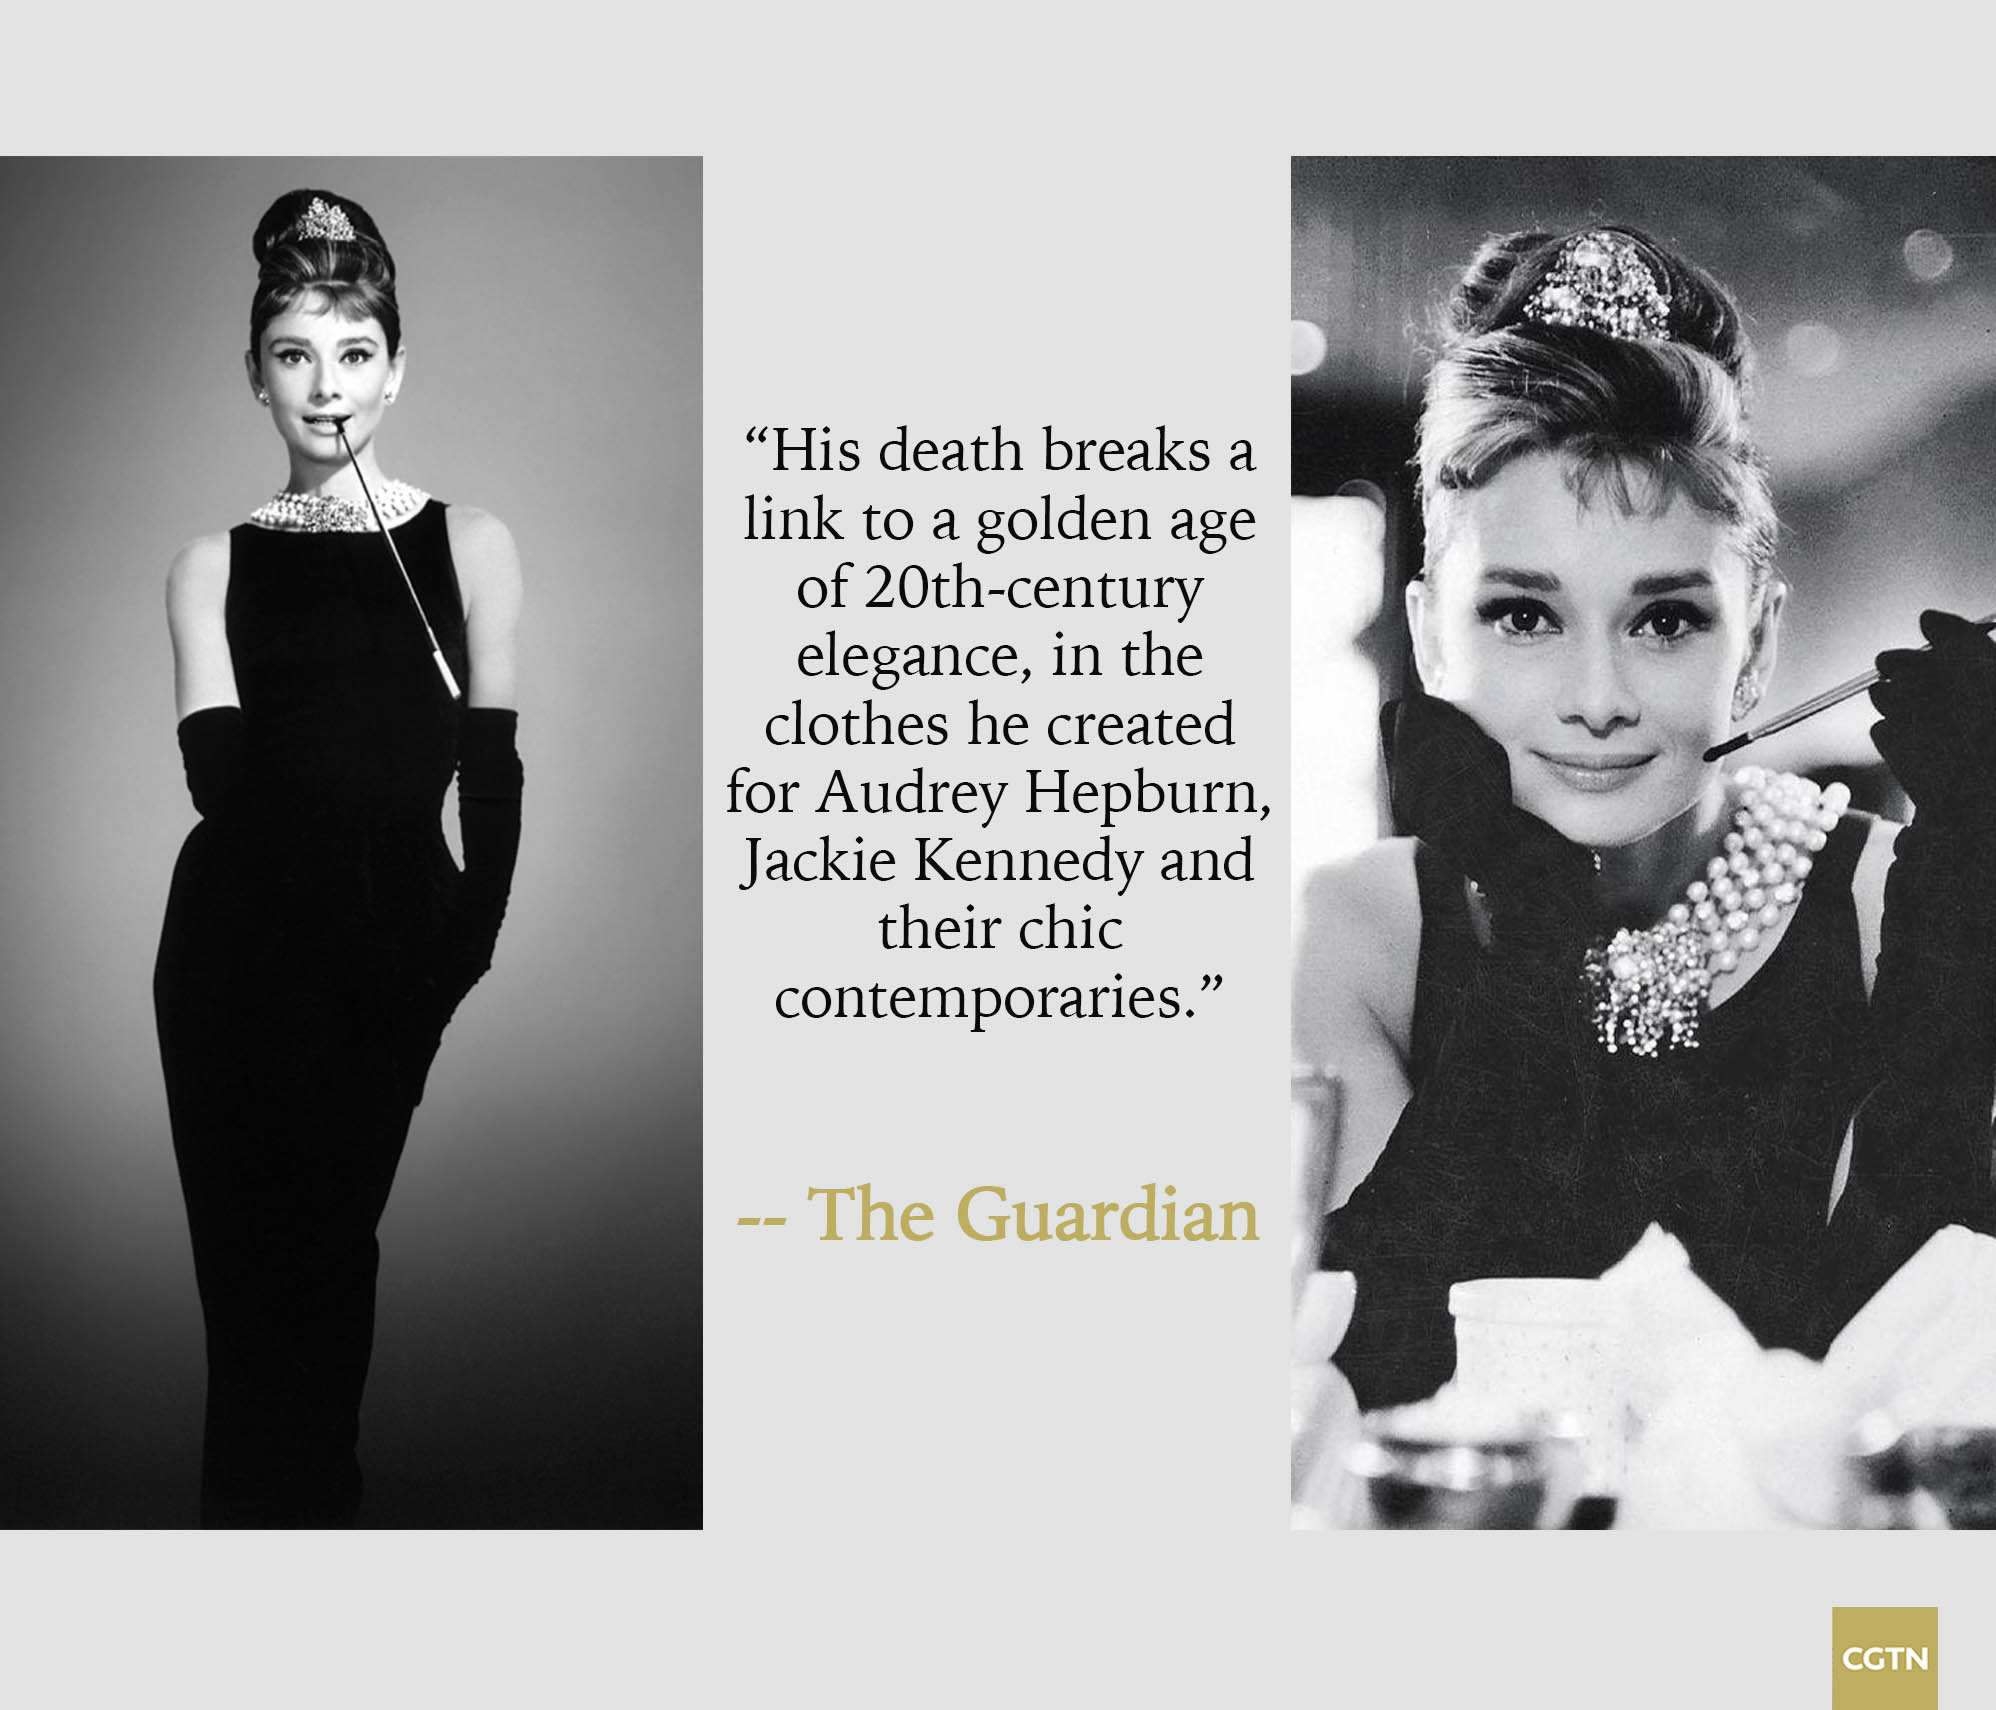 Givenchy enchanted the world with his dress for Audrey Hepburn in  Breakfast at Tiffany's and his many other style landmarks